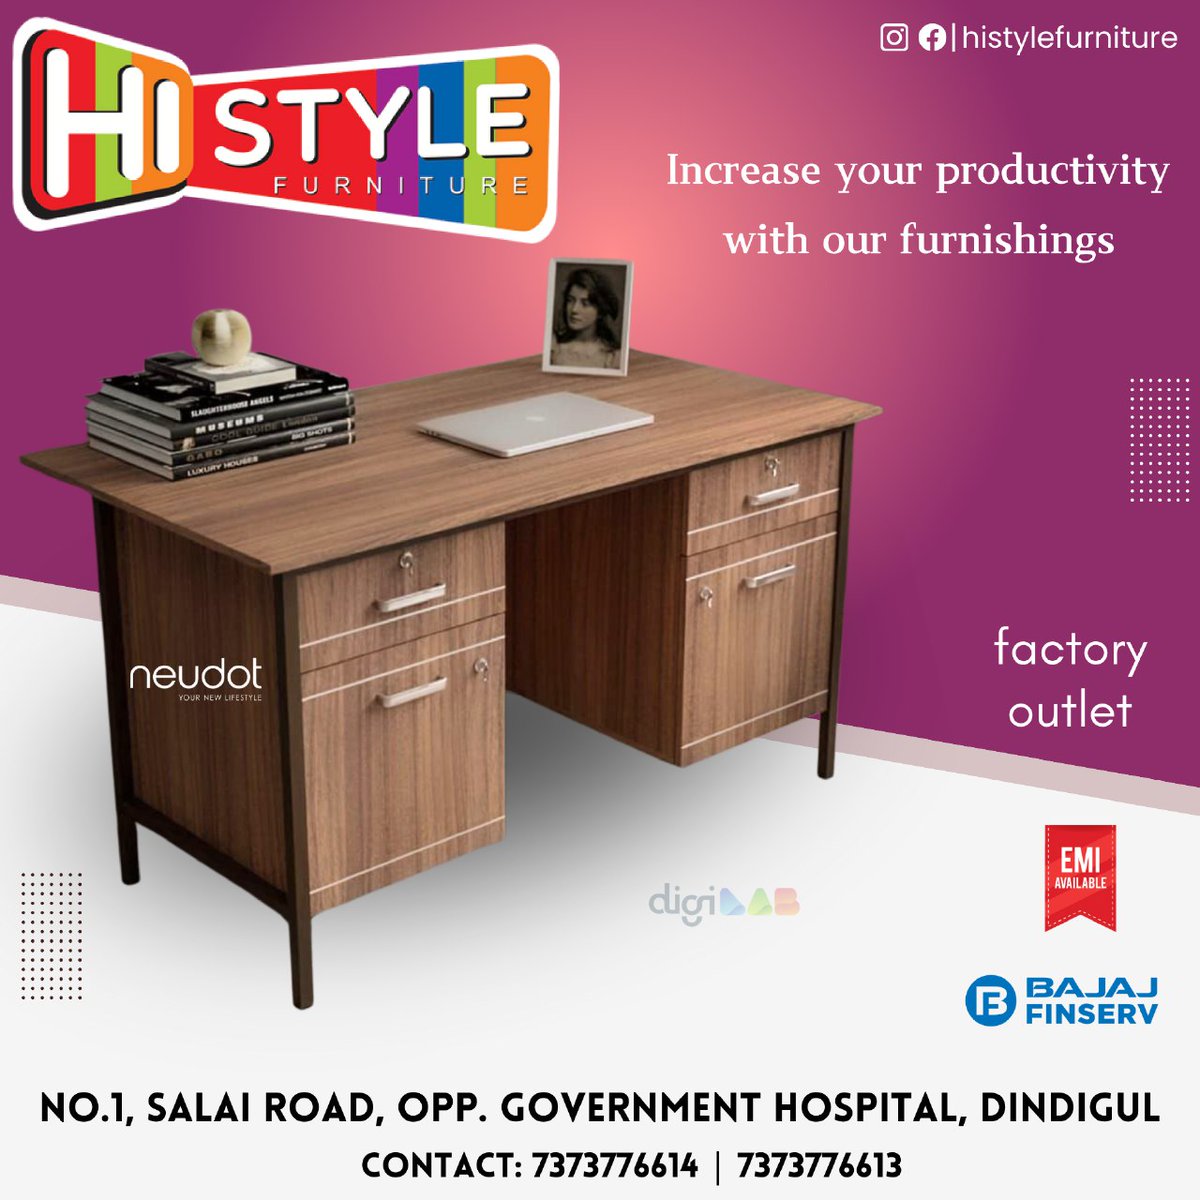 Increase your productivity with our furnishings
@histylefurnitures 

For enquiries
+91 73737 76614
+91 73737 76613
#kingcot #chritmas #sofa #furnitures #histyle #interordesign  #bookself #teatable #2seatersofa  #3seatersofa #tvcabinet #diningtable #schoolfurniture